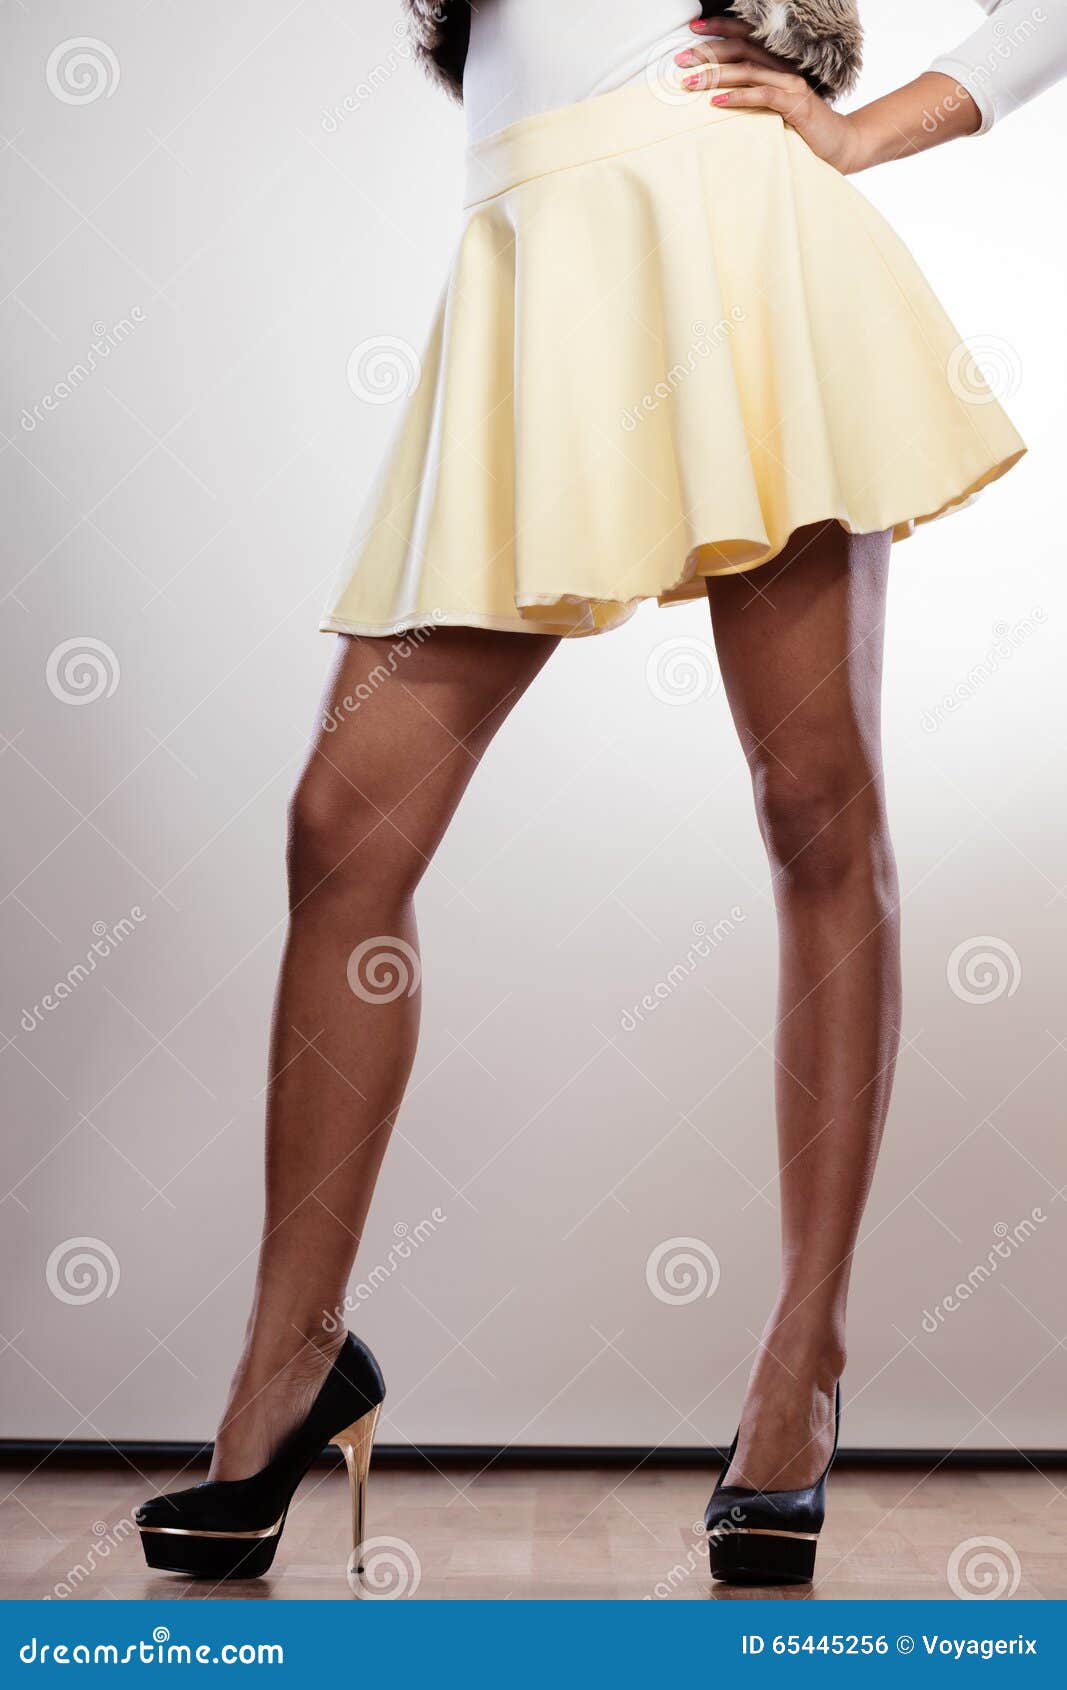 Attractive legs of woman stock photo. Image of attractive - 65445256